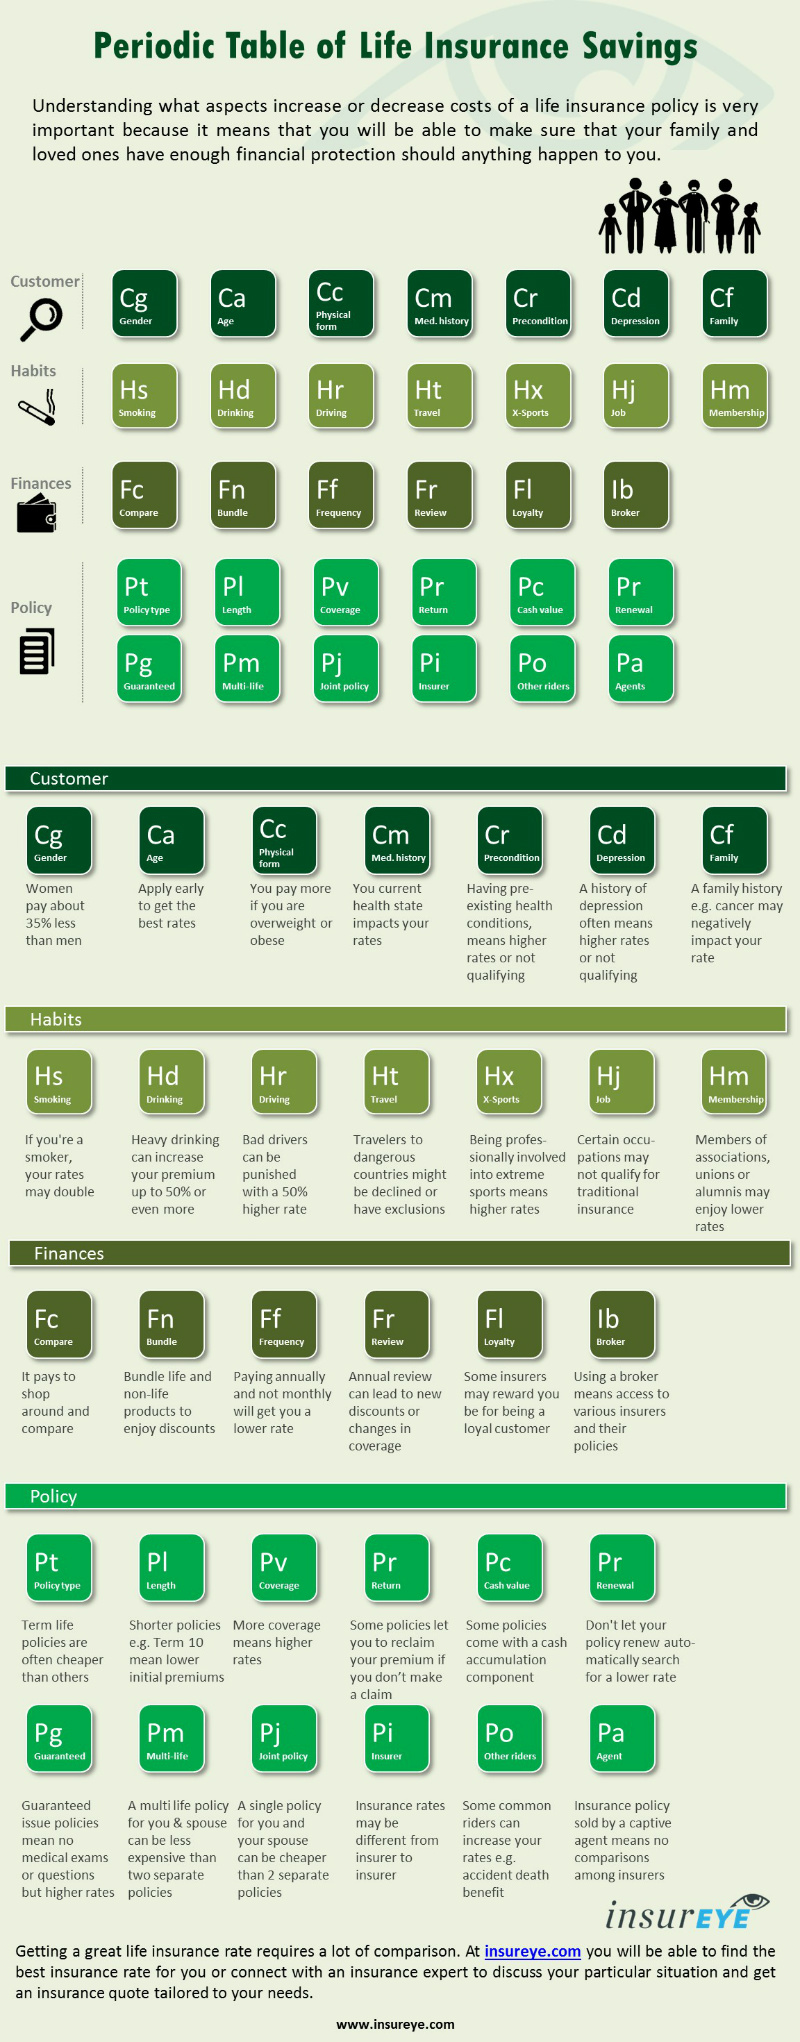 32 Items Hijacking Your Life Insurance Rates | Infographic